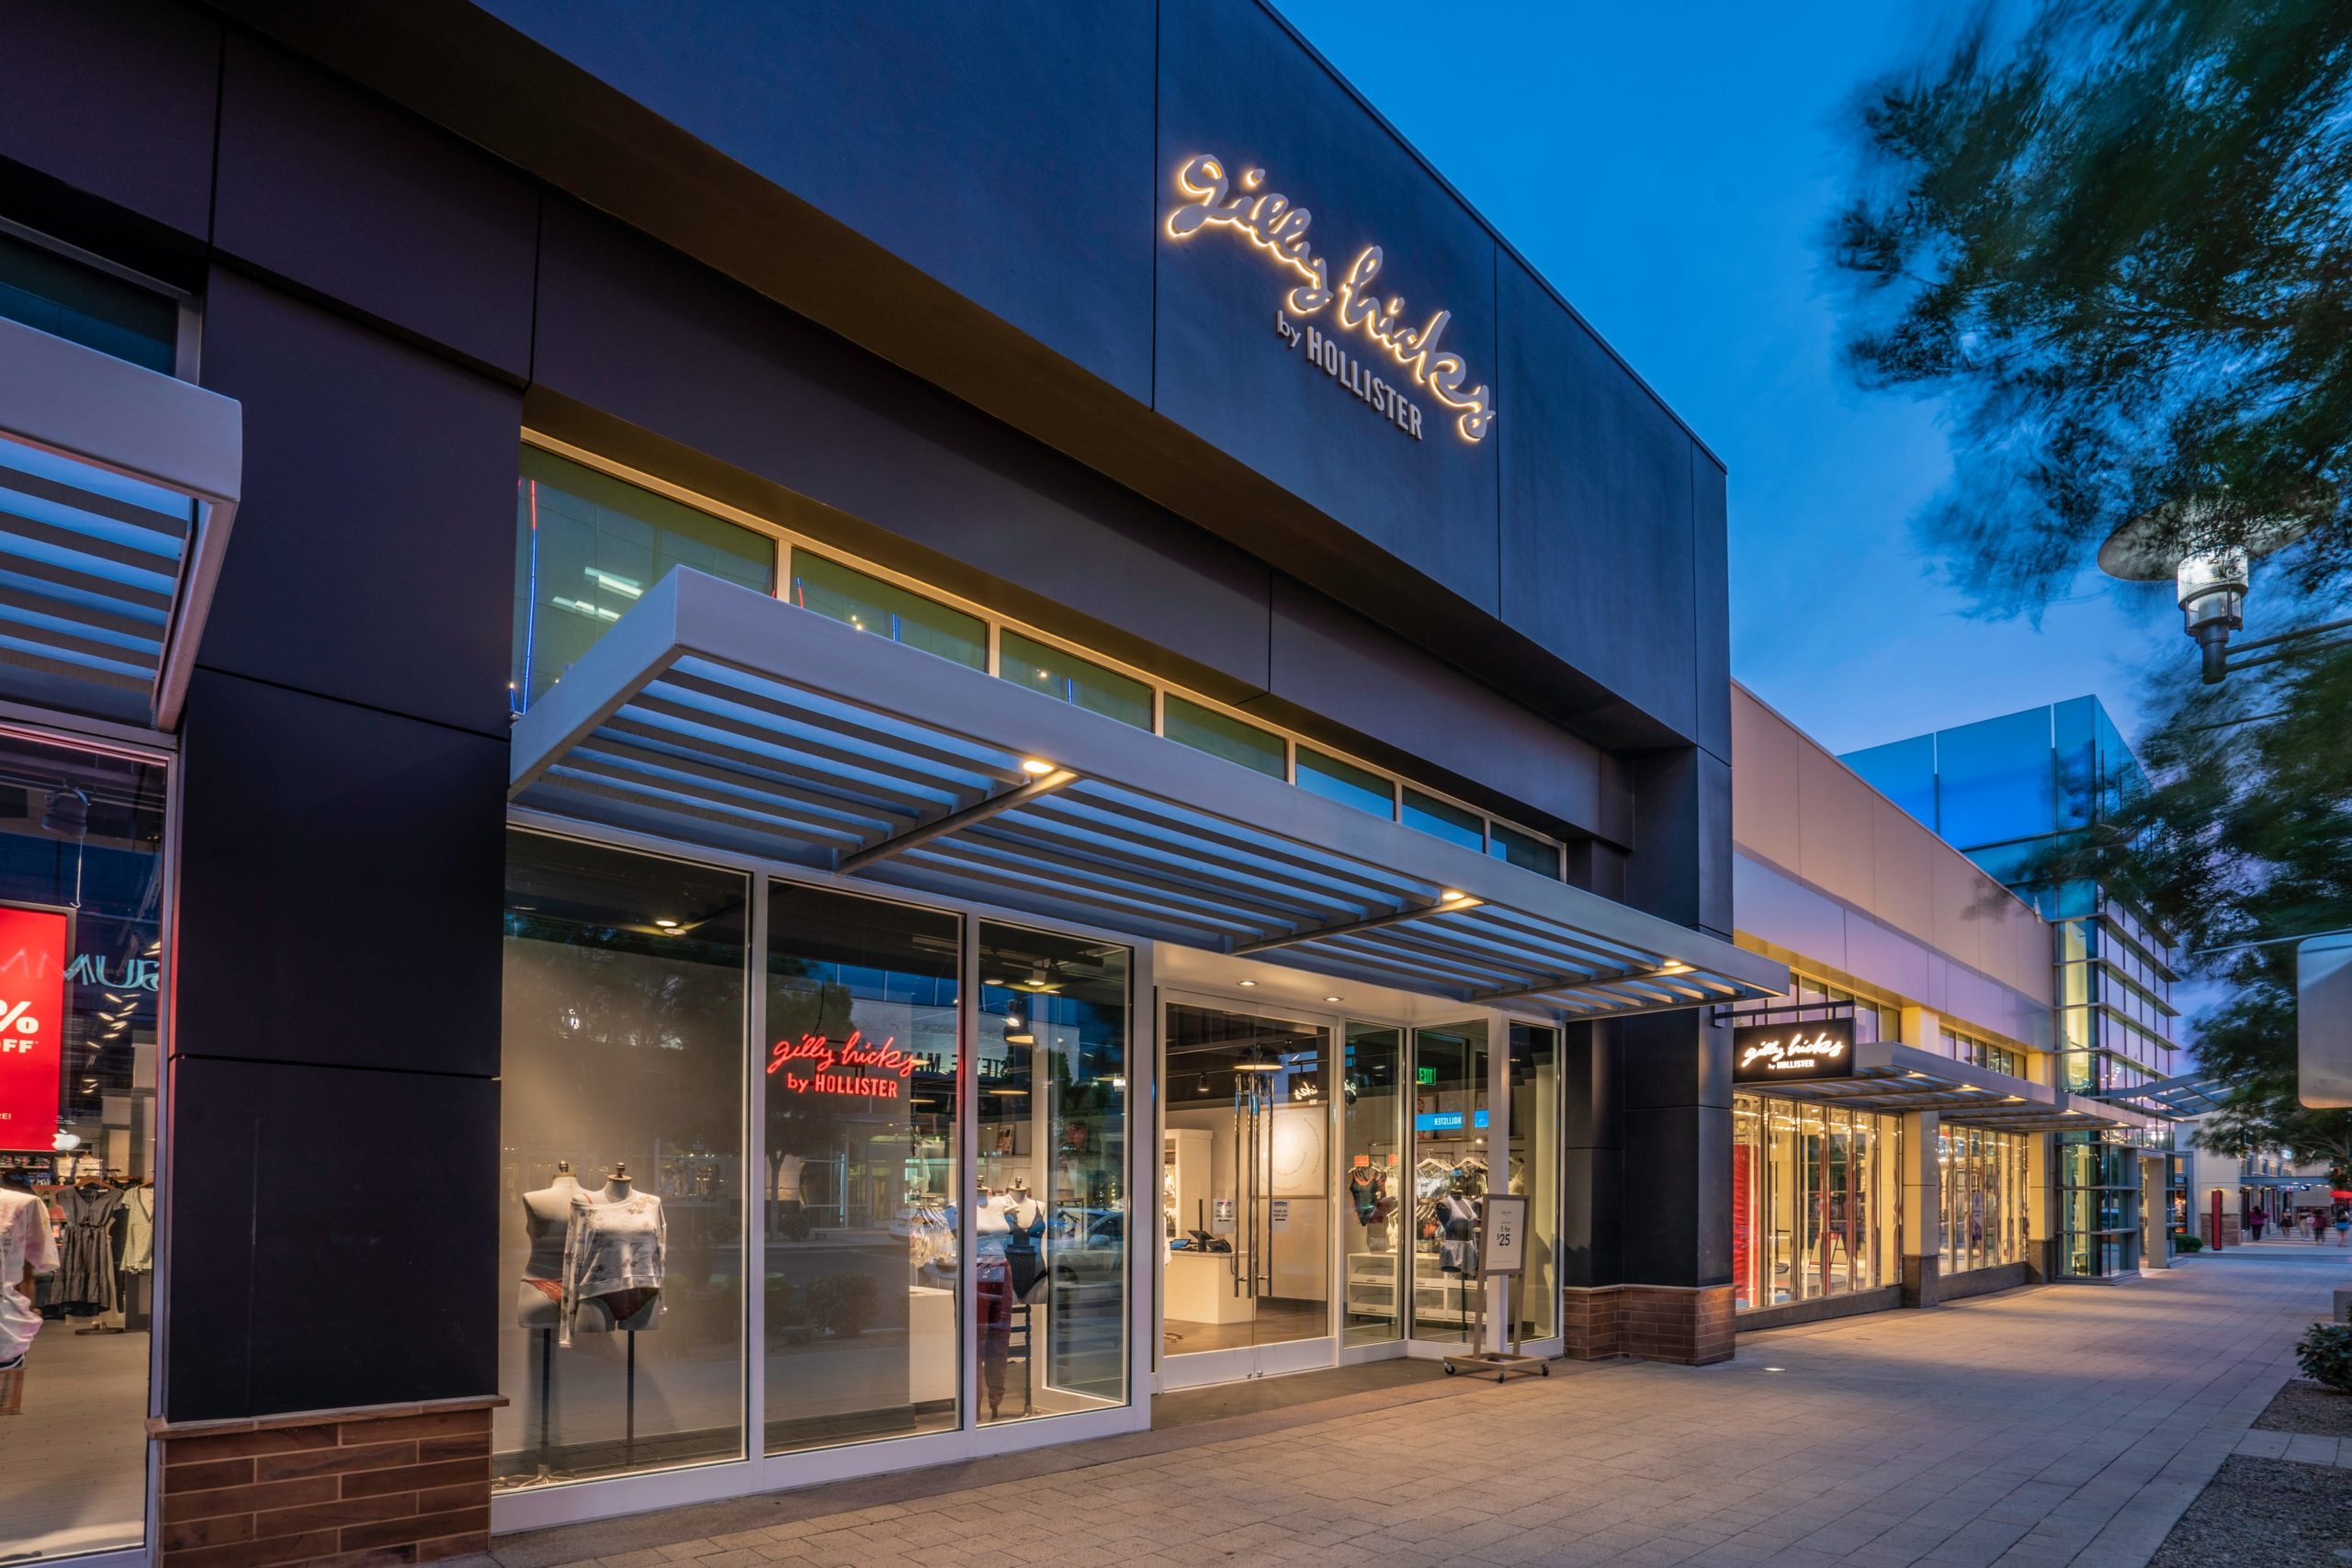 https://summerlin.com/wp-content/uploads/2020/06/Giilly-Hicks-Storefront-scaled.jpg